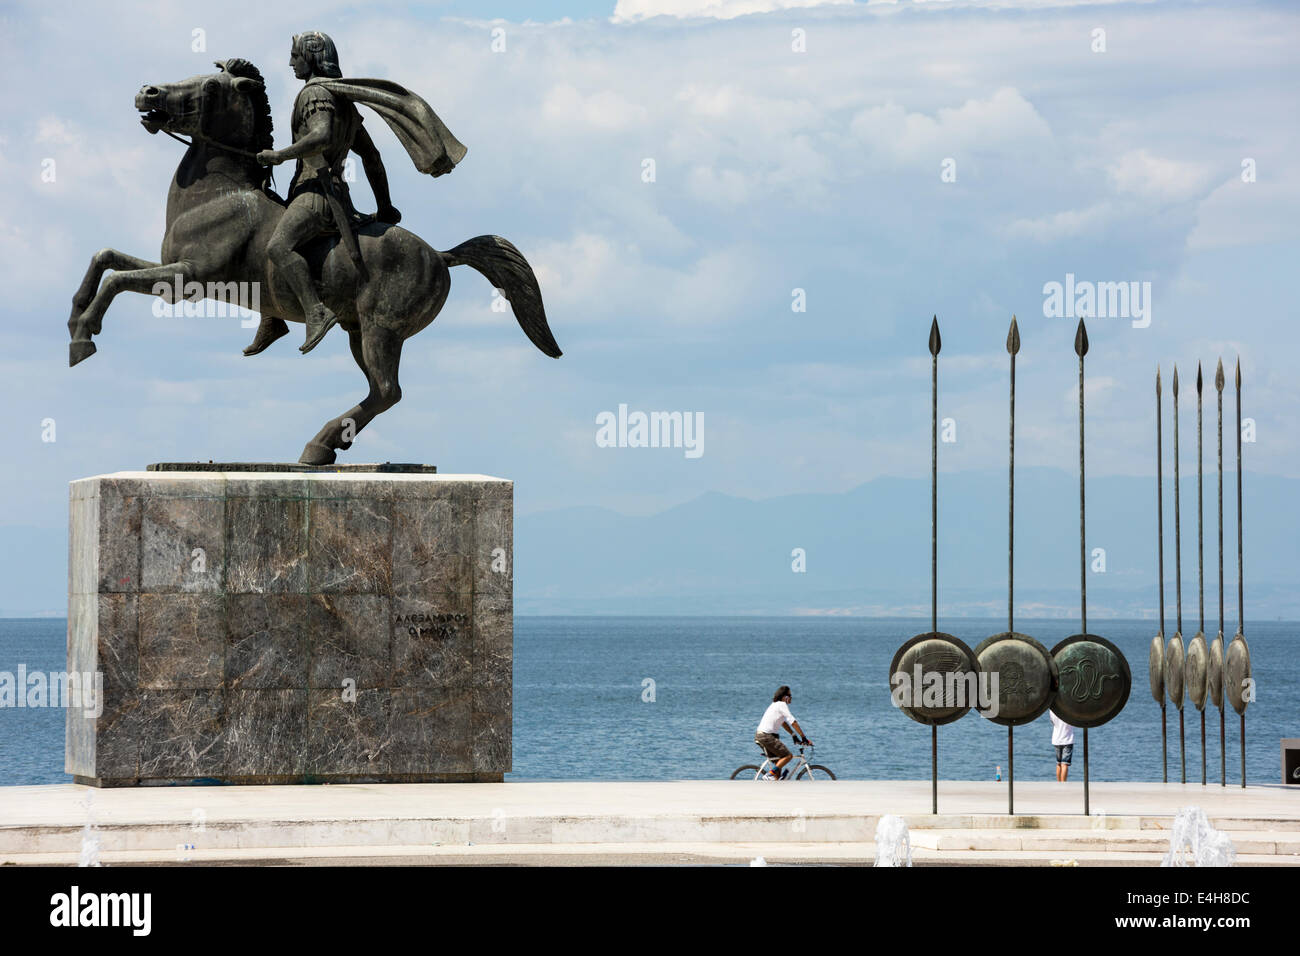 Statue of Alexander the Great and his horse Bucephalus, during a sunny morning, in the city of Thessaloniki, Greece. Stock Photo